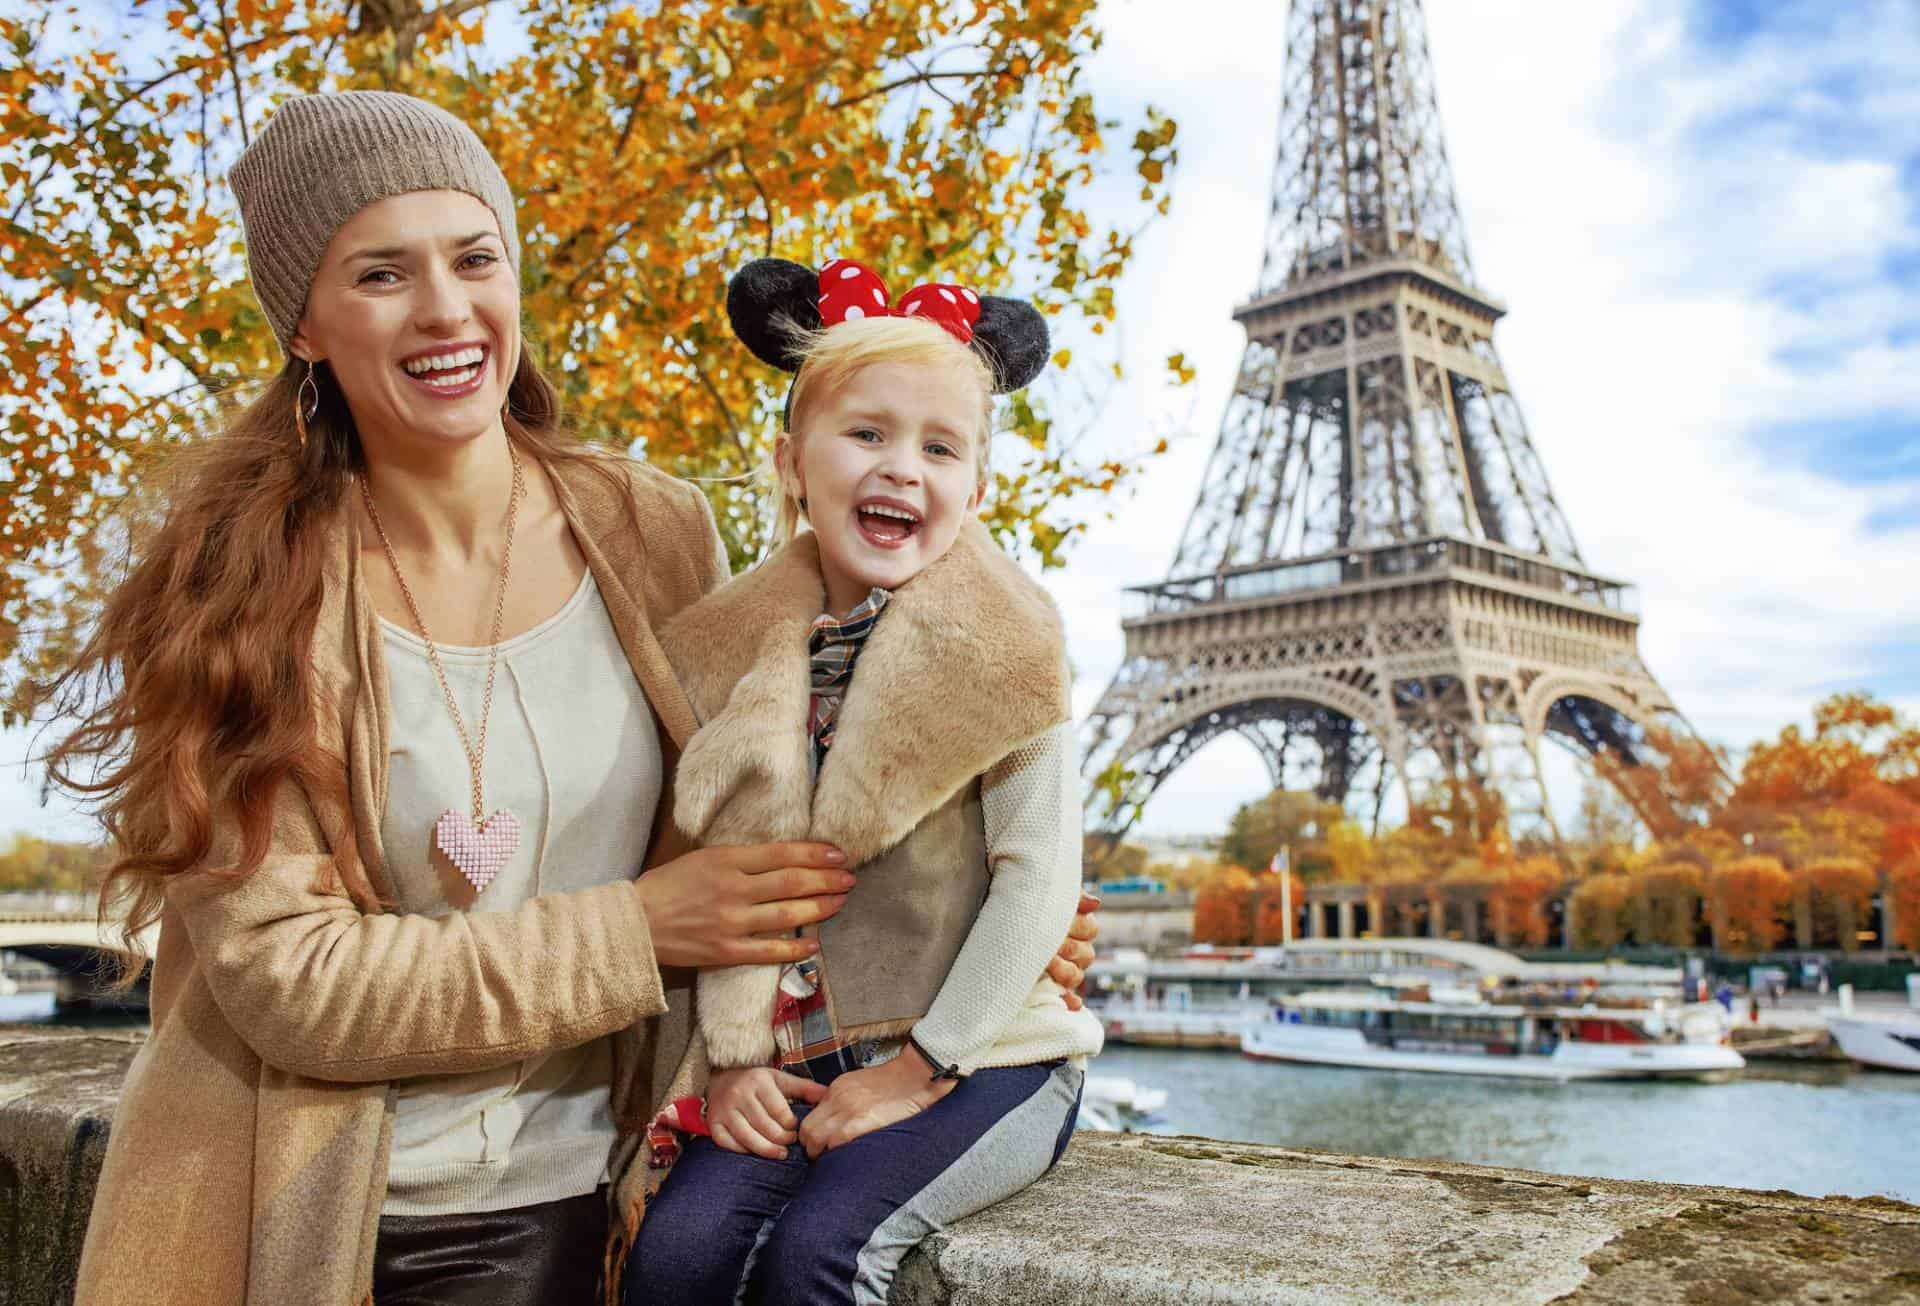 Smiling mother and daughter with Eiffel Tower in the background in autumn, Paris, France.